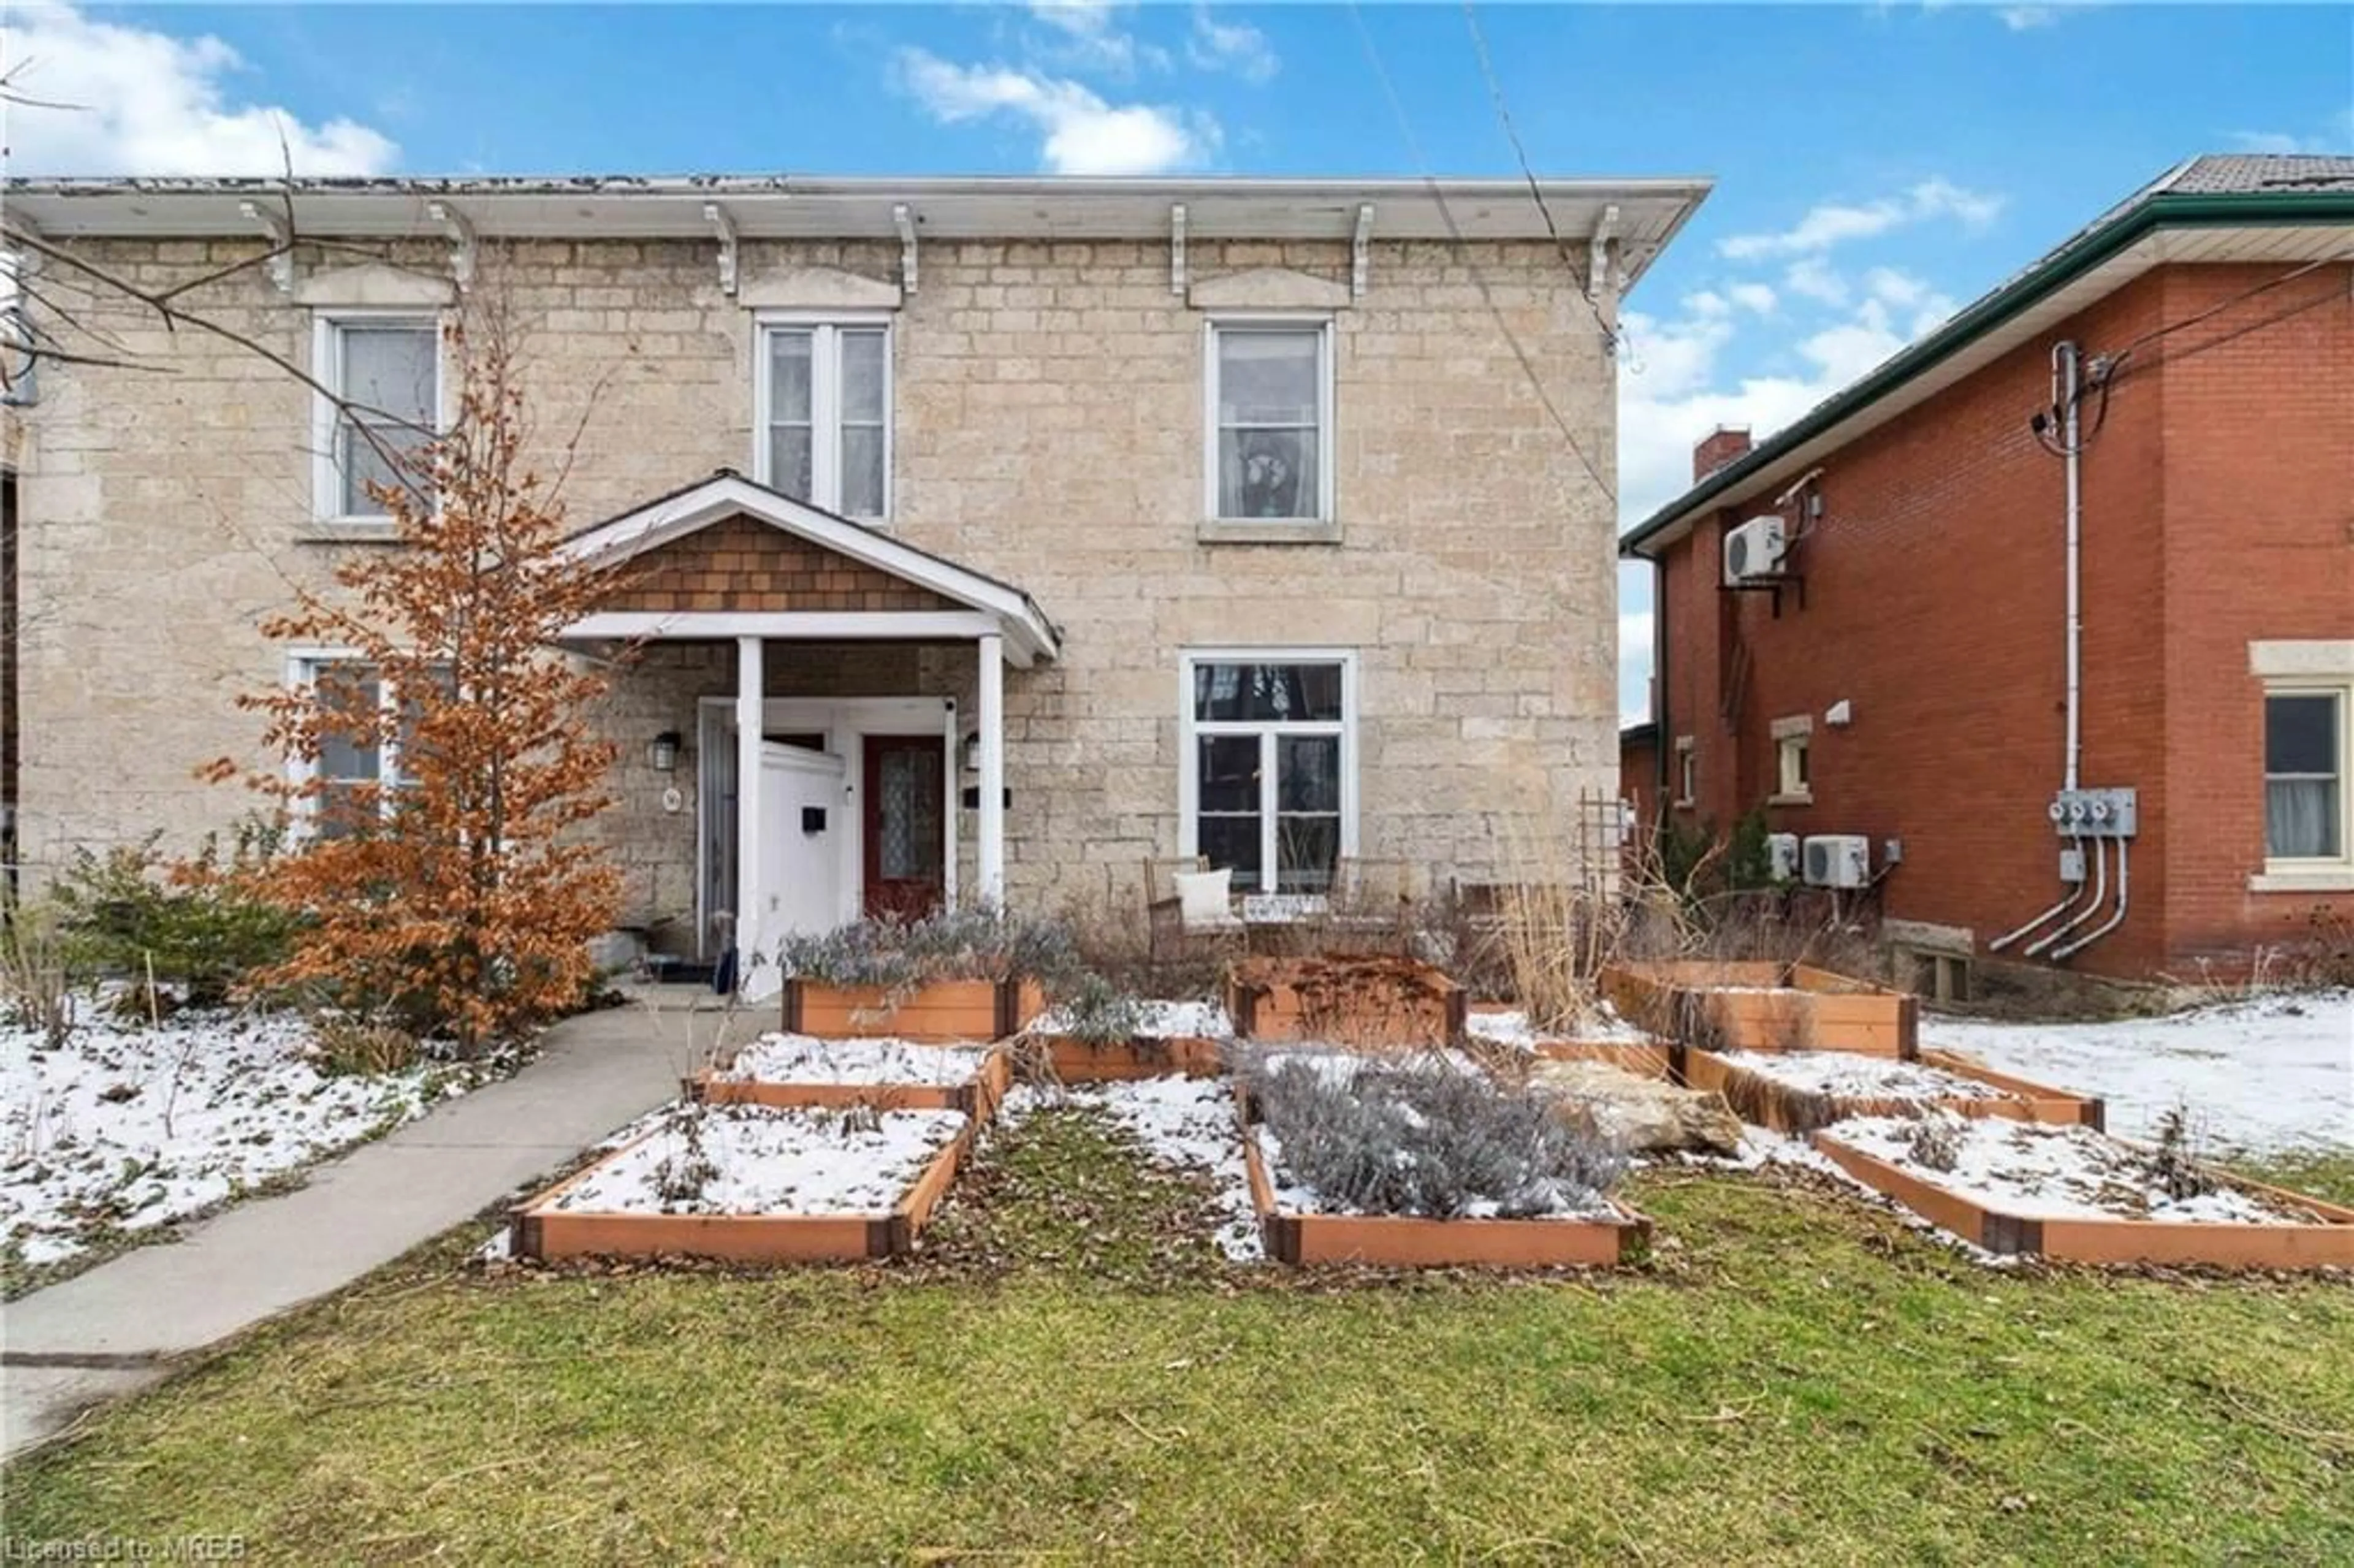 Home with brick exterior material for 38 Waterloo Ave, Guelph Ontario N1H 3H5